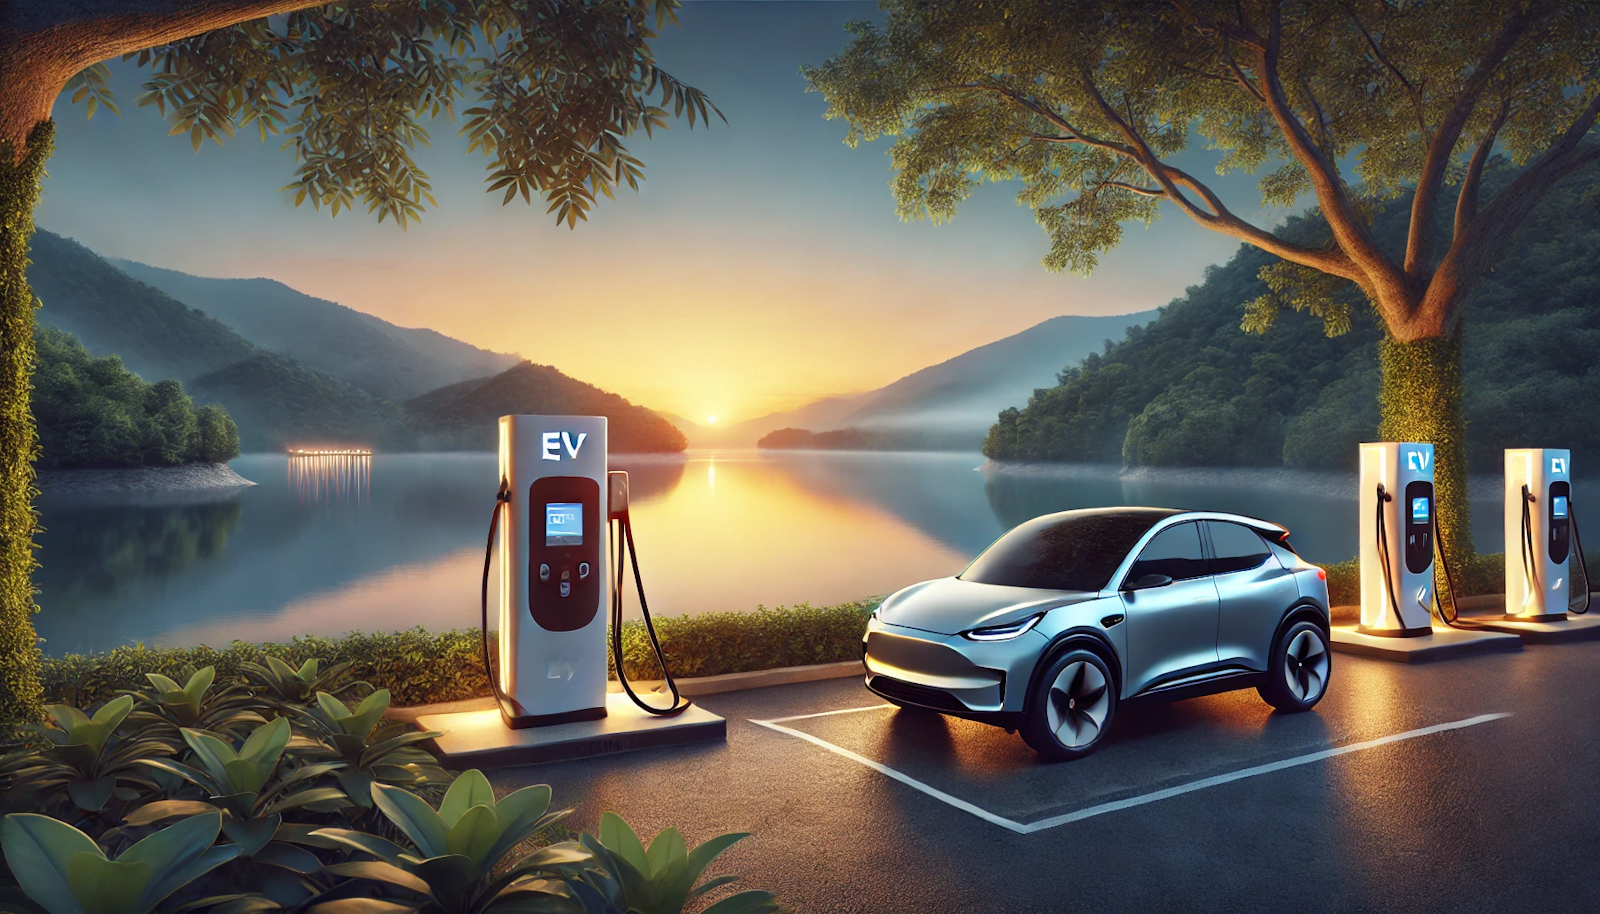 Lakeside scene at dusk with an electric vehicle (EV) charging station, surrounded by serene water, mountains, and lush trees, showcasing sustainable technology in nature.